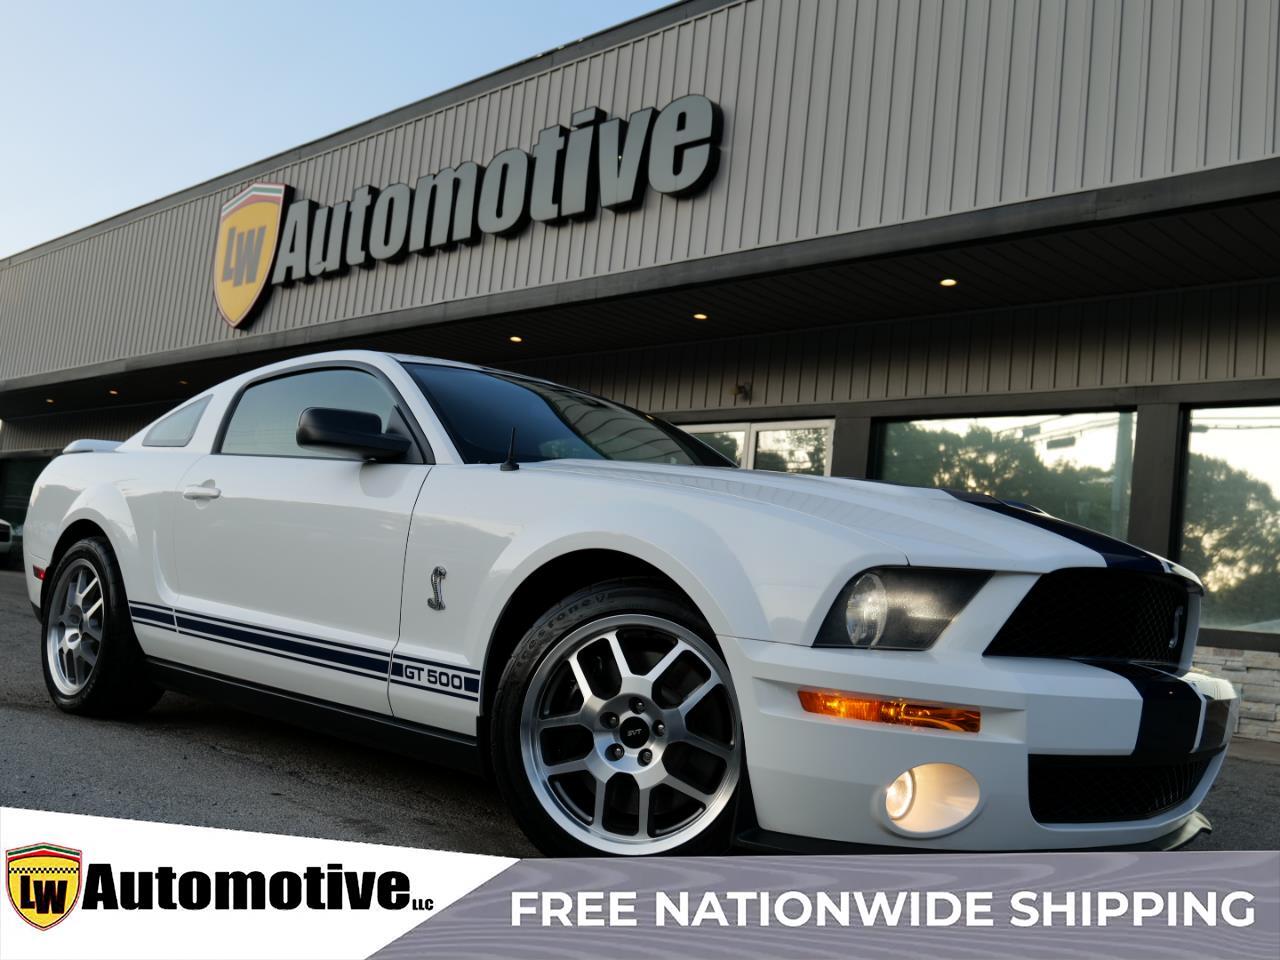 2009 Ford Mustang 2dr Cpe Shelby GT500